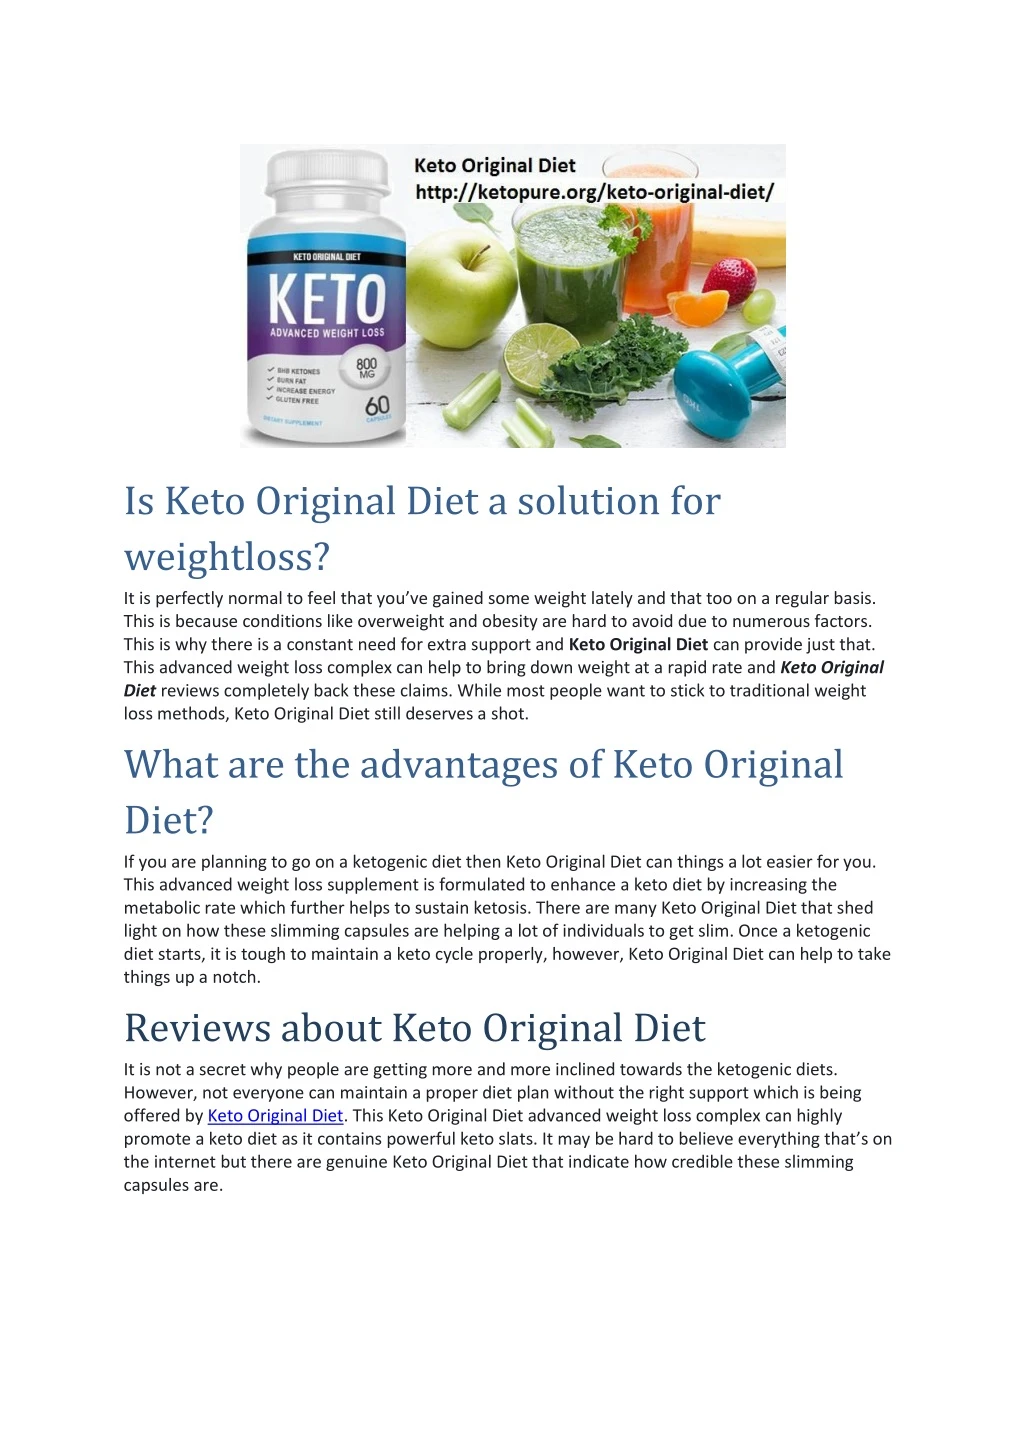 is keto original diet a solution for weightloss